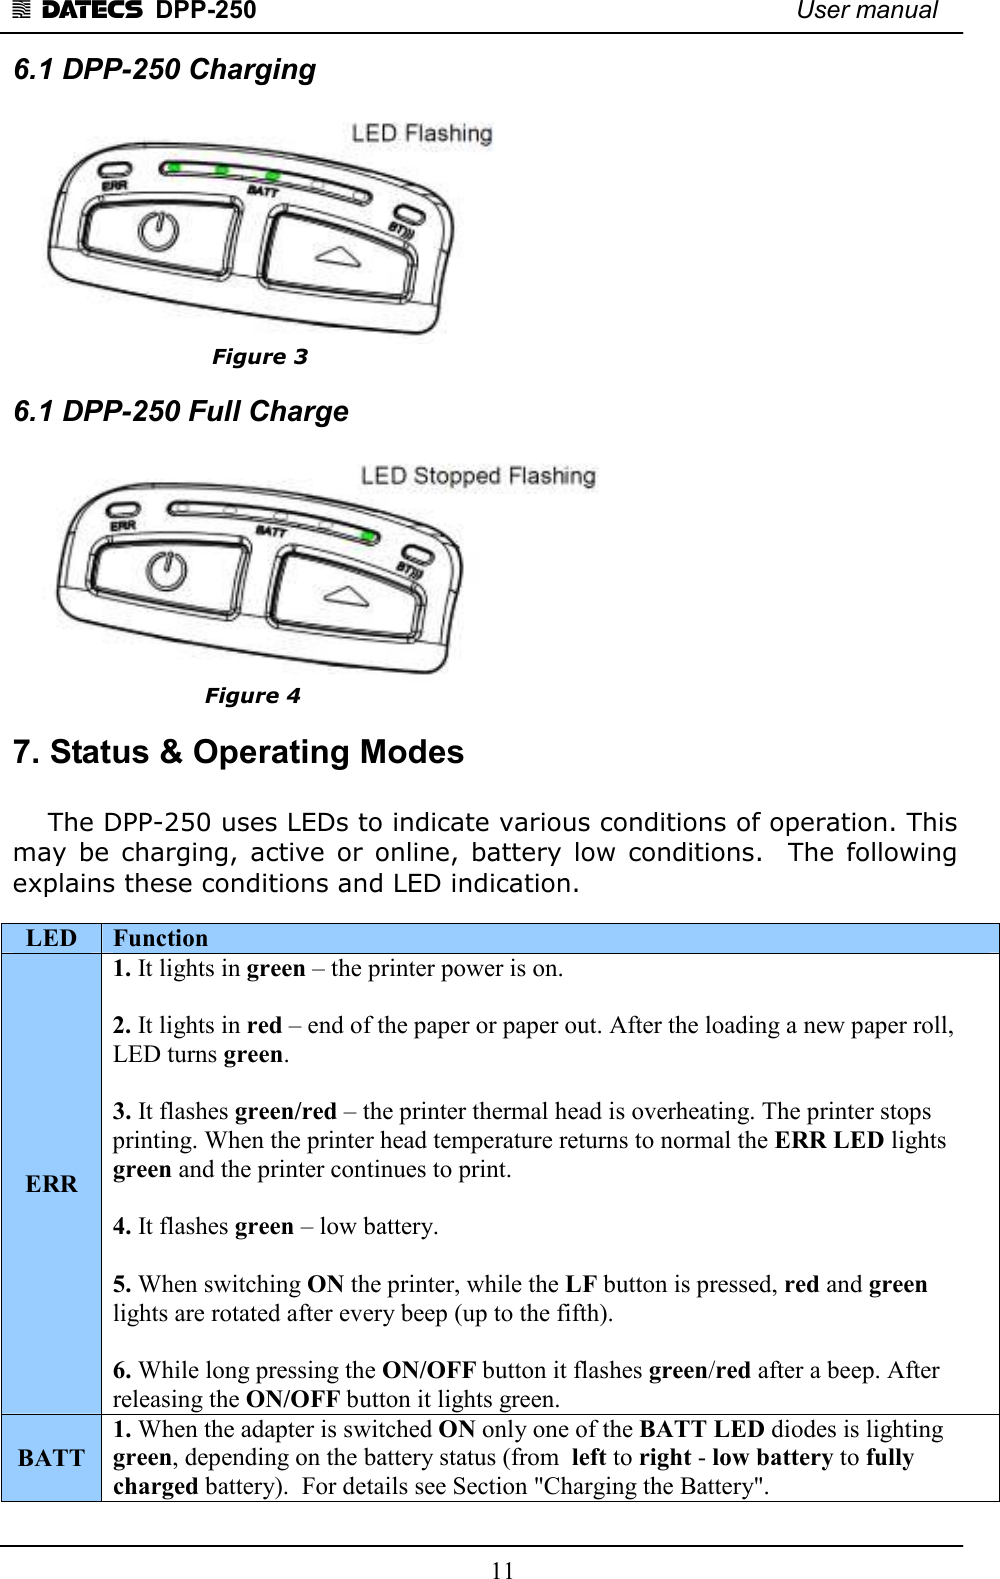 1 DATECS  DPP-250    User manual     11 6.1 DPP-250 Charging                              Figure 3 6.1 DPP-250 Full Charge                             Figure 4 7. Status &amp; Operating Modes      The DPP-250 uses LEDs to indicate various conditions of operation. This may  be  charging, active  or  online,  battery  low  conditions.    The  following explains these conditions and LED indication.  LED  Function ERR 1. It lights in green – the printer power is on.  2. It lights in red – end of the paper or paper out. After the loading a new paper roll, LED turns green.  3. It flashes green/red – the printer thermal head is overheating. The printer stops printing. When the printer head temperature returns to normal the ERR LED lights green and the printer continues to print.  4. It flashes green – low battery.  5. When switching ON the printer, while the LF button is pressed, red and green lights are rotated after every beep (up to the fifth).  6. While long pressing the ON/OFF button it flashes green/red after a beep. After releasing the ON/OFF button it lights green. BATT 1. When the adapter is switched ON only one of the BATT LED diodes is lighting green, depending on the battery status (from  left to right - low battery to fully charged battery).  For details see Section &quot;Charging the Battery&quot;. 